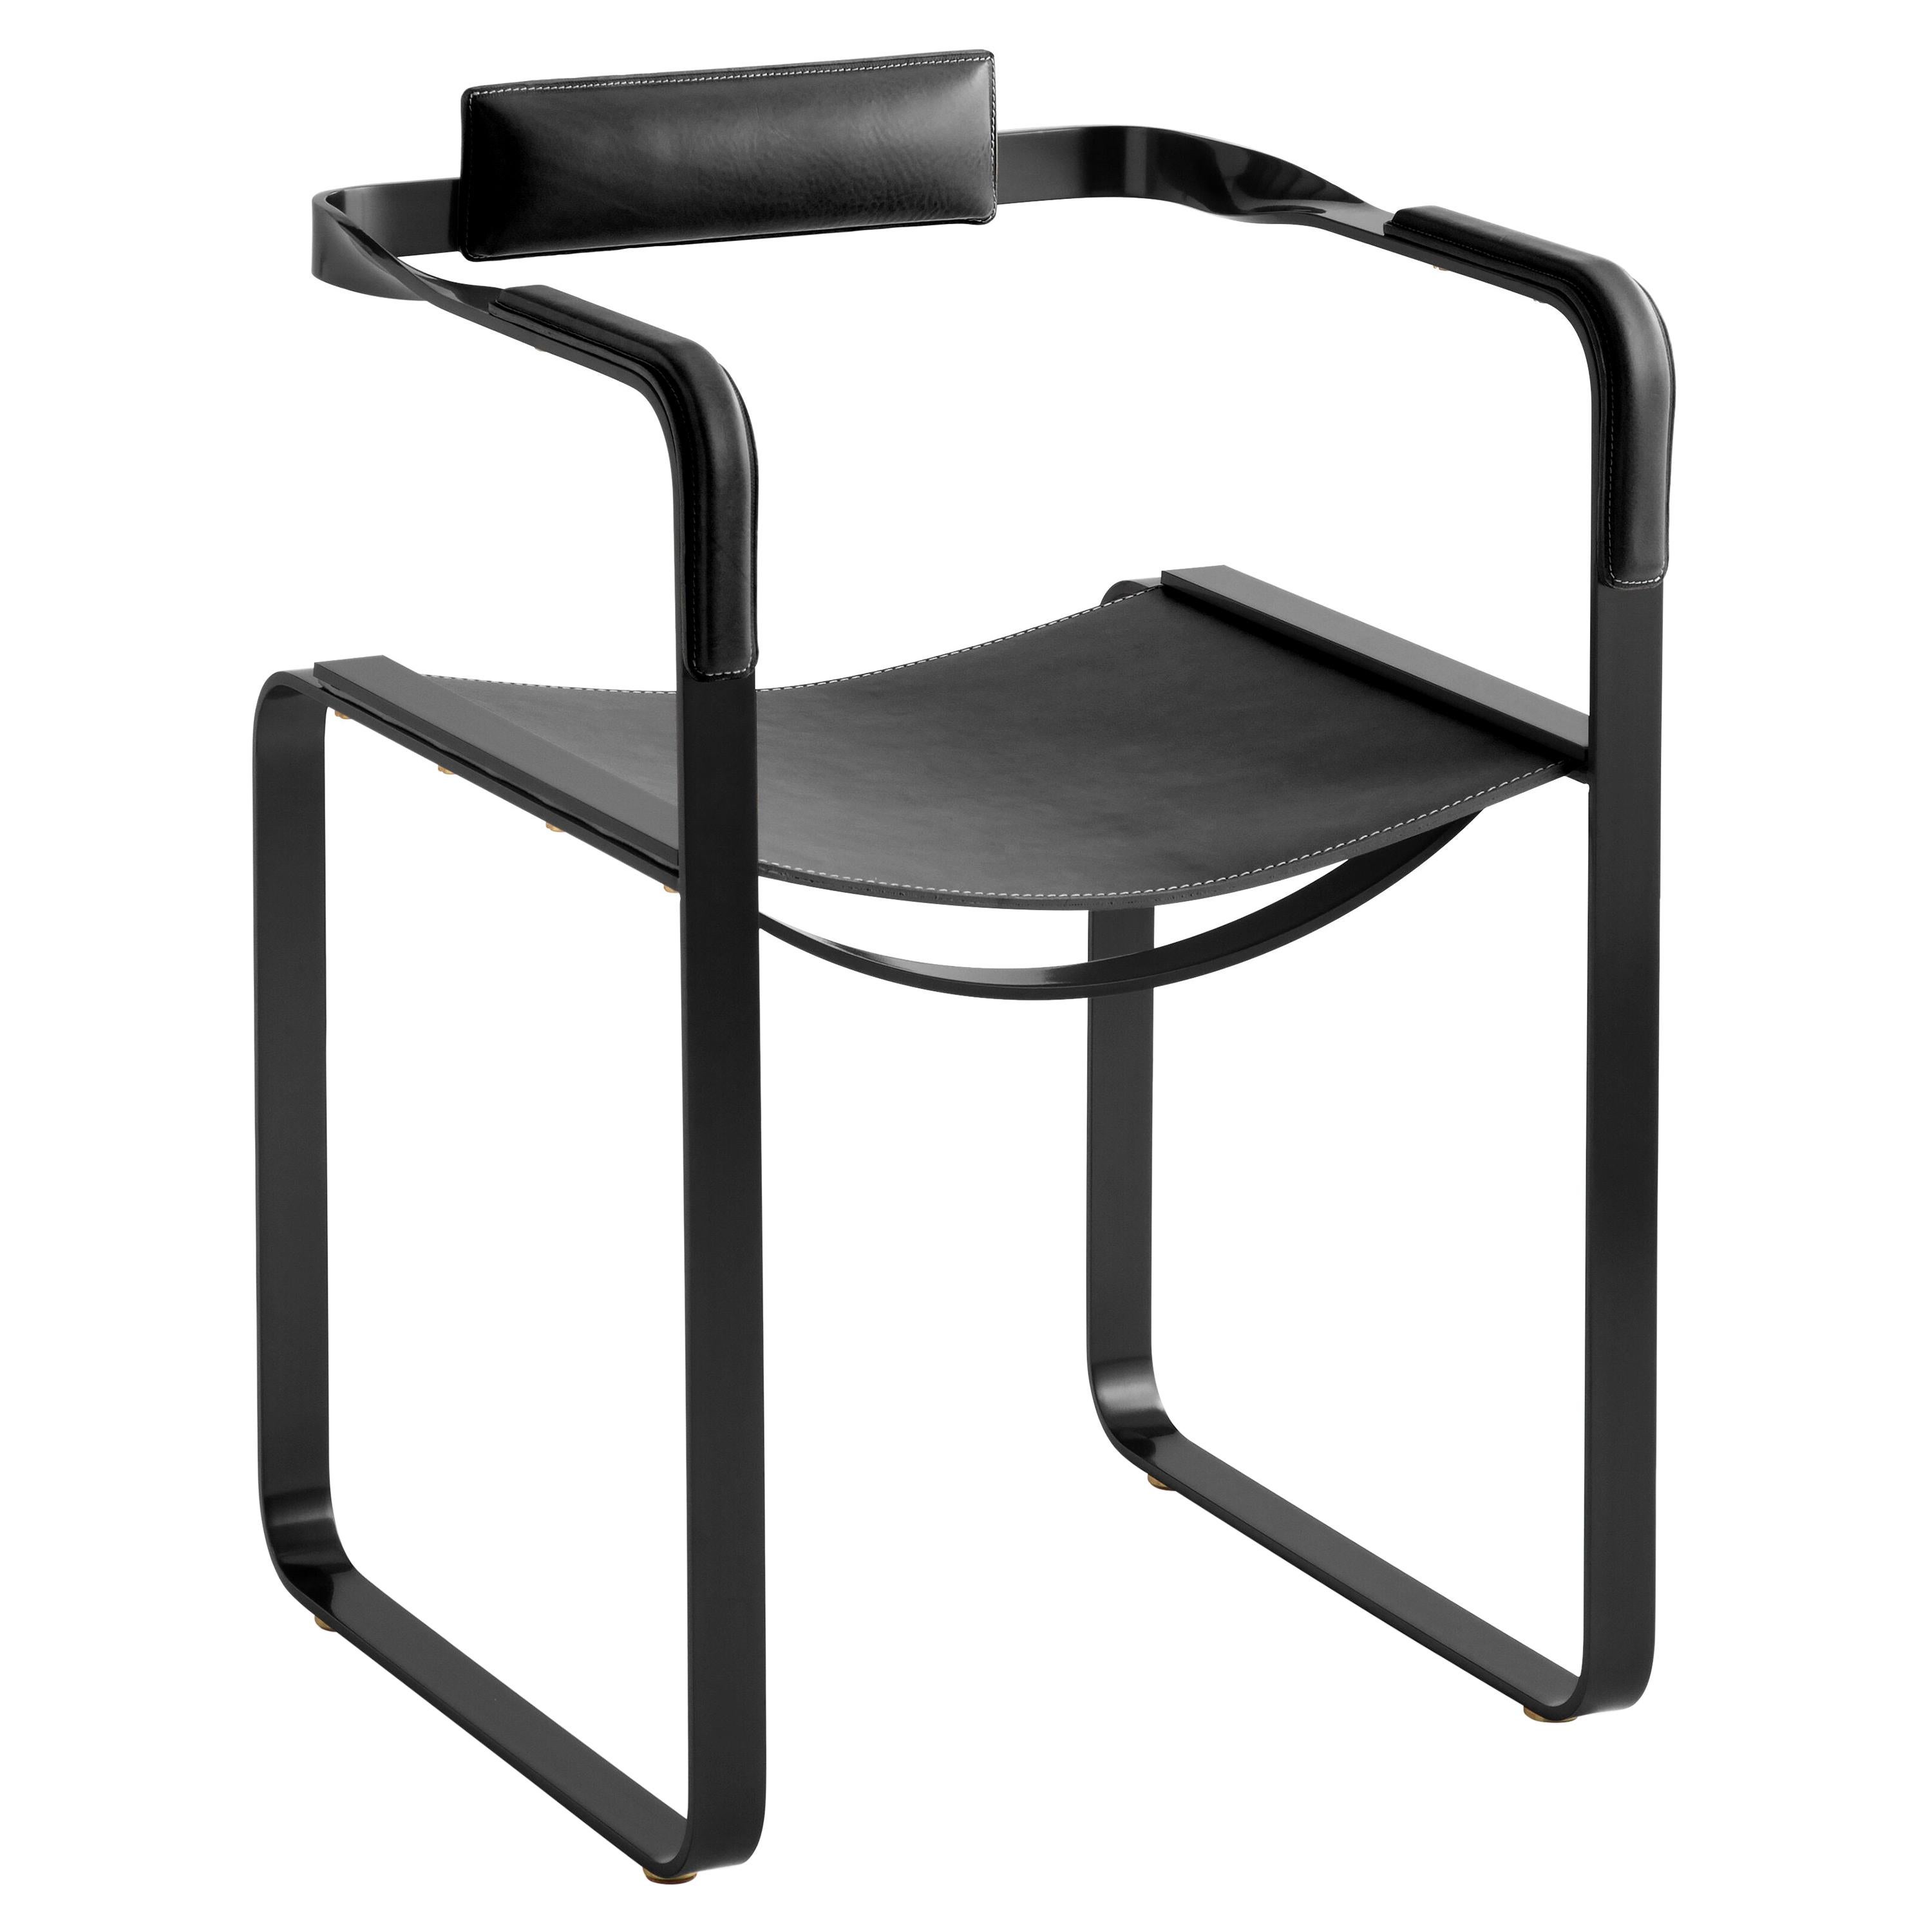 Armchair, Black Smoke Steel and Black Leather, Contemporary Style